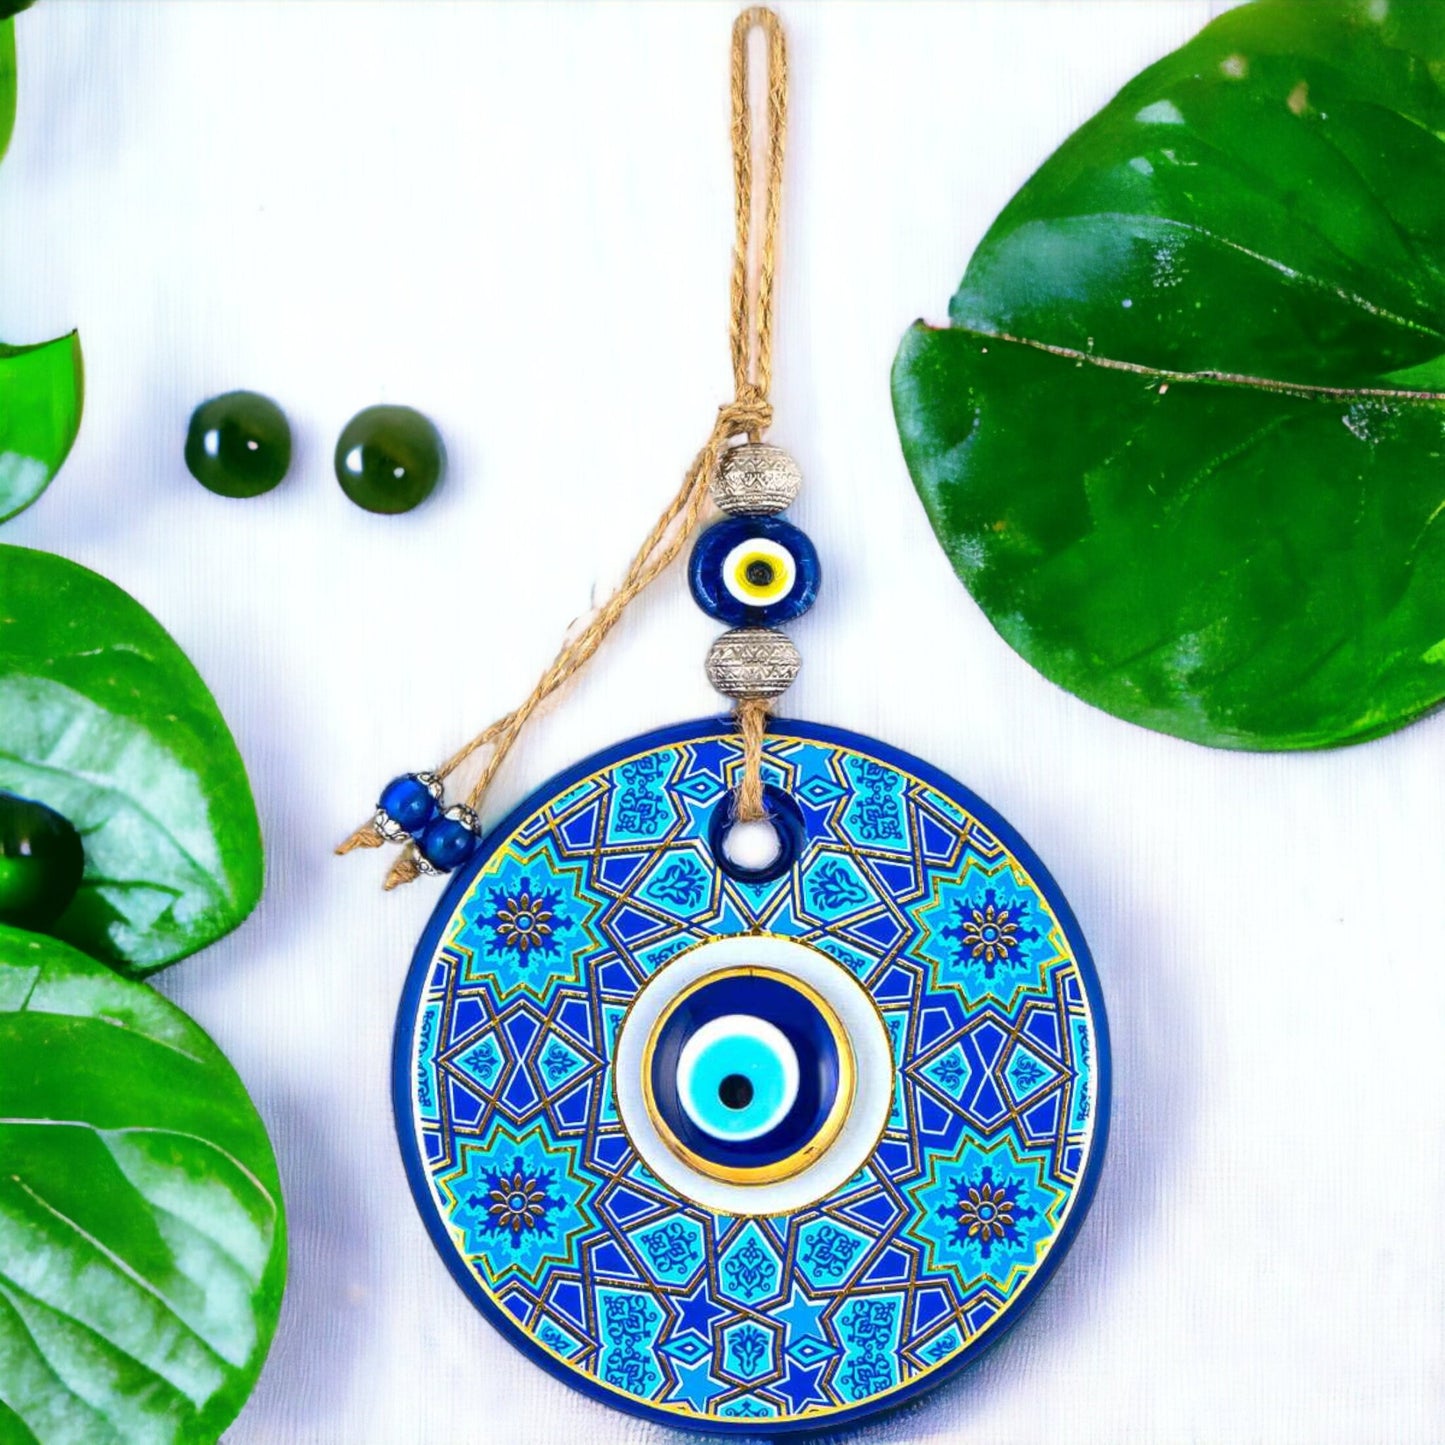 Evil Eye Wall Hanging, House Protection, Home Decor Large Wall Hanging Double Layer Nazar Boncuk Mal De Ojo - Blue and Gold Star Pattern